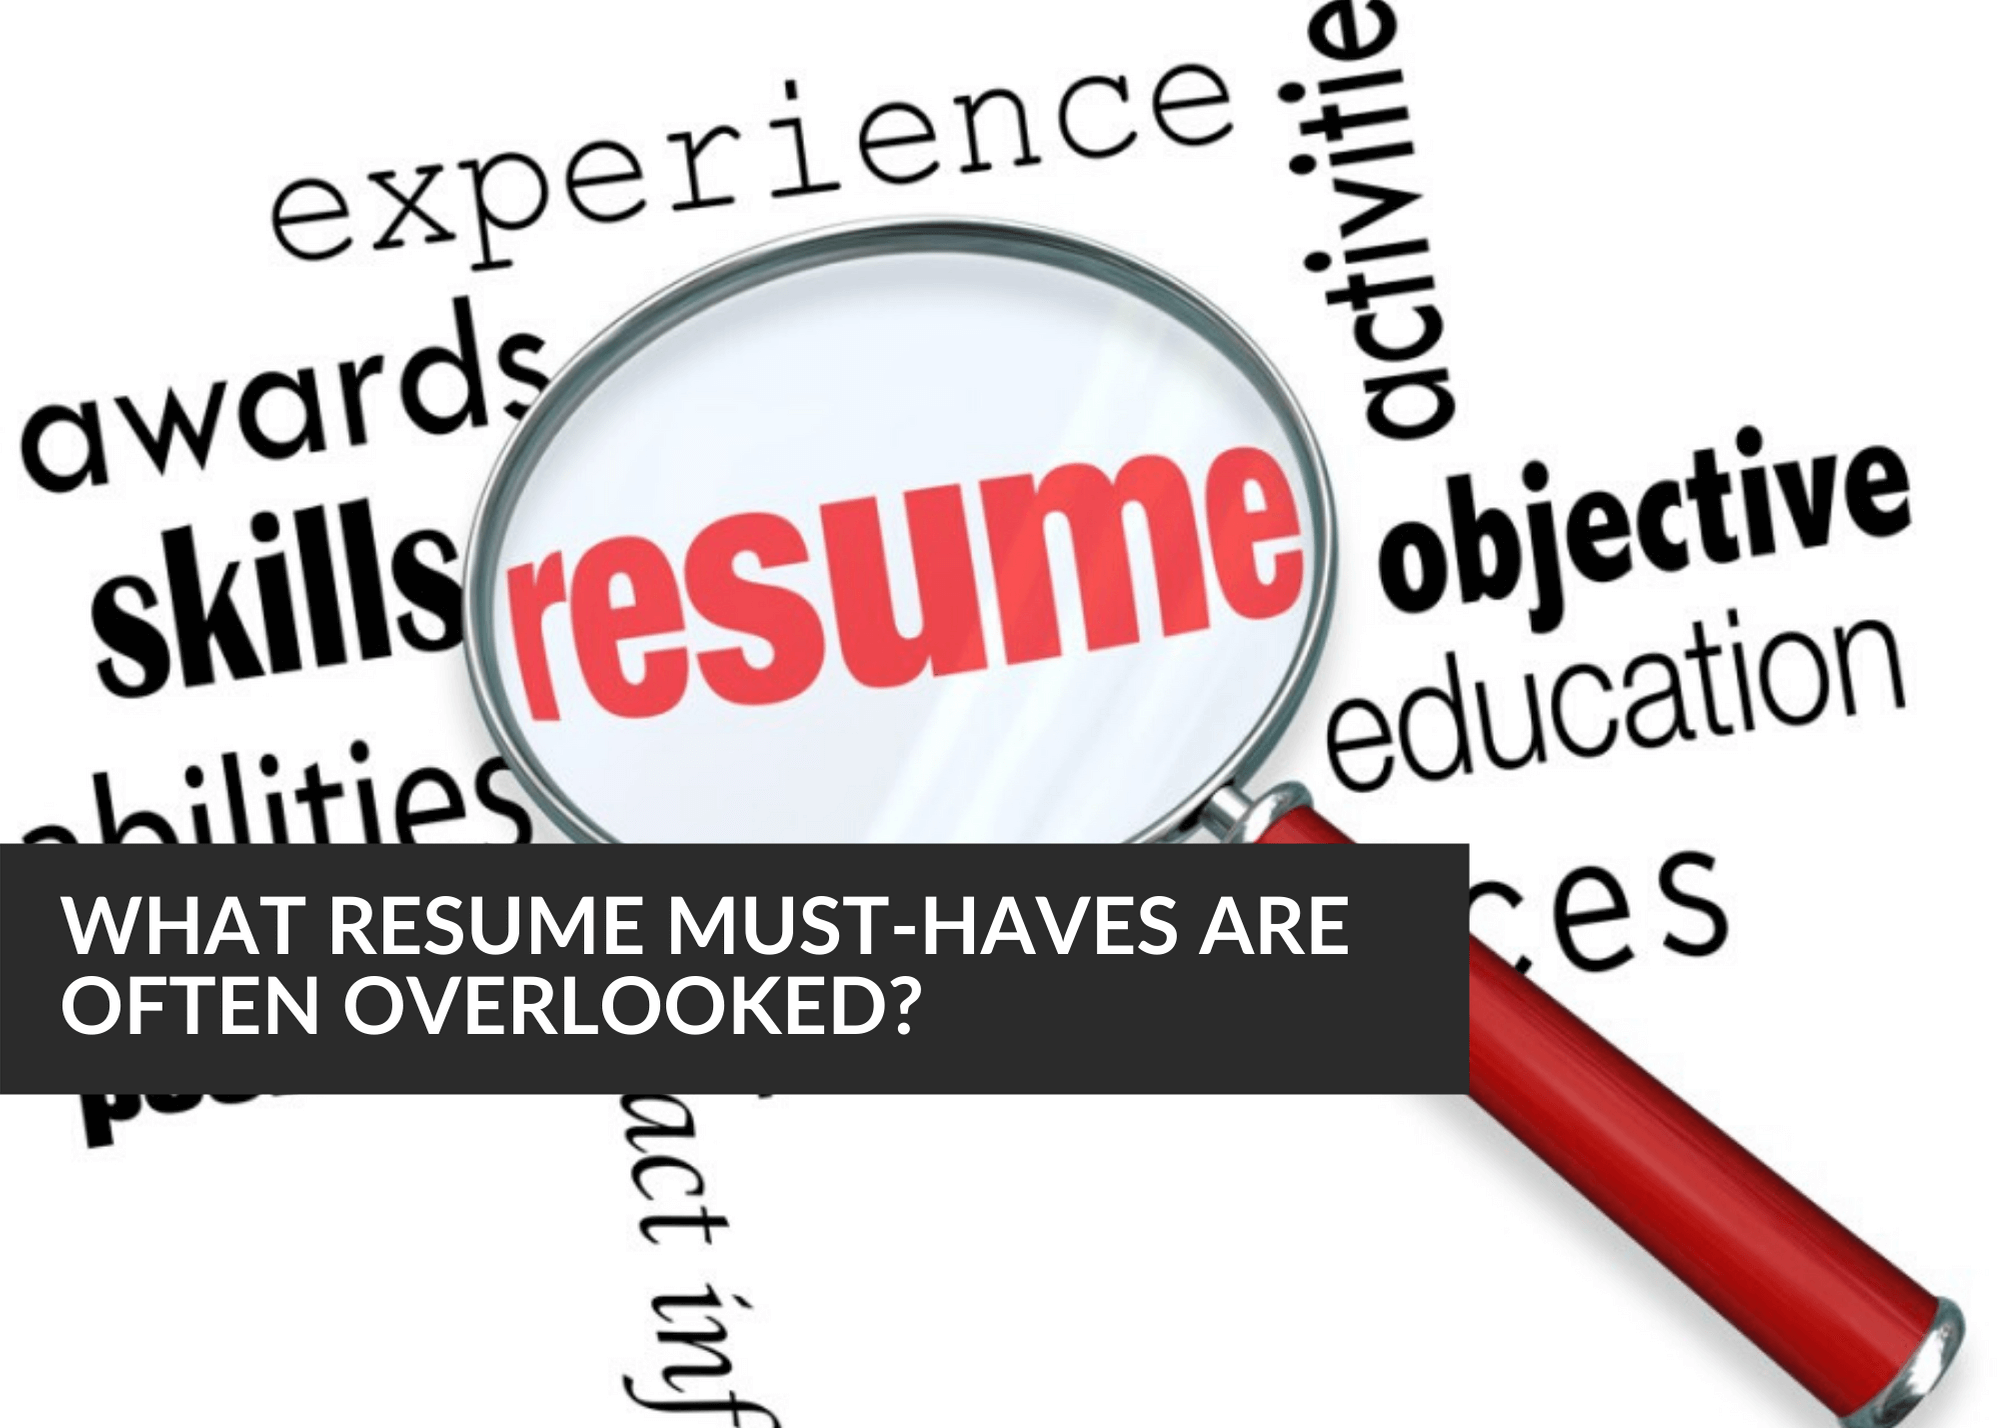 What Resume Must-Haves Are Often Overlooked?